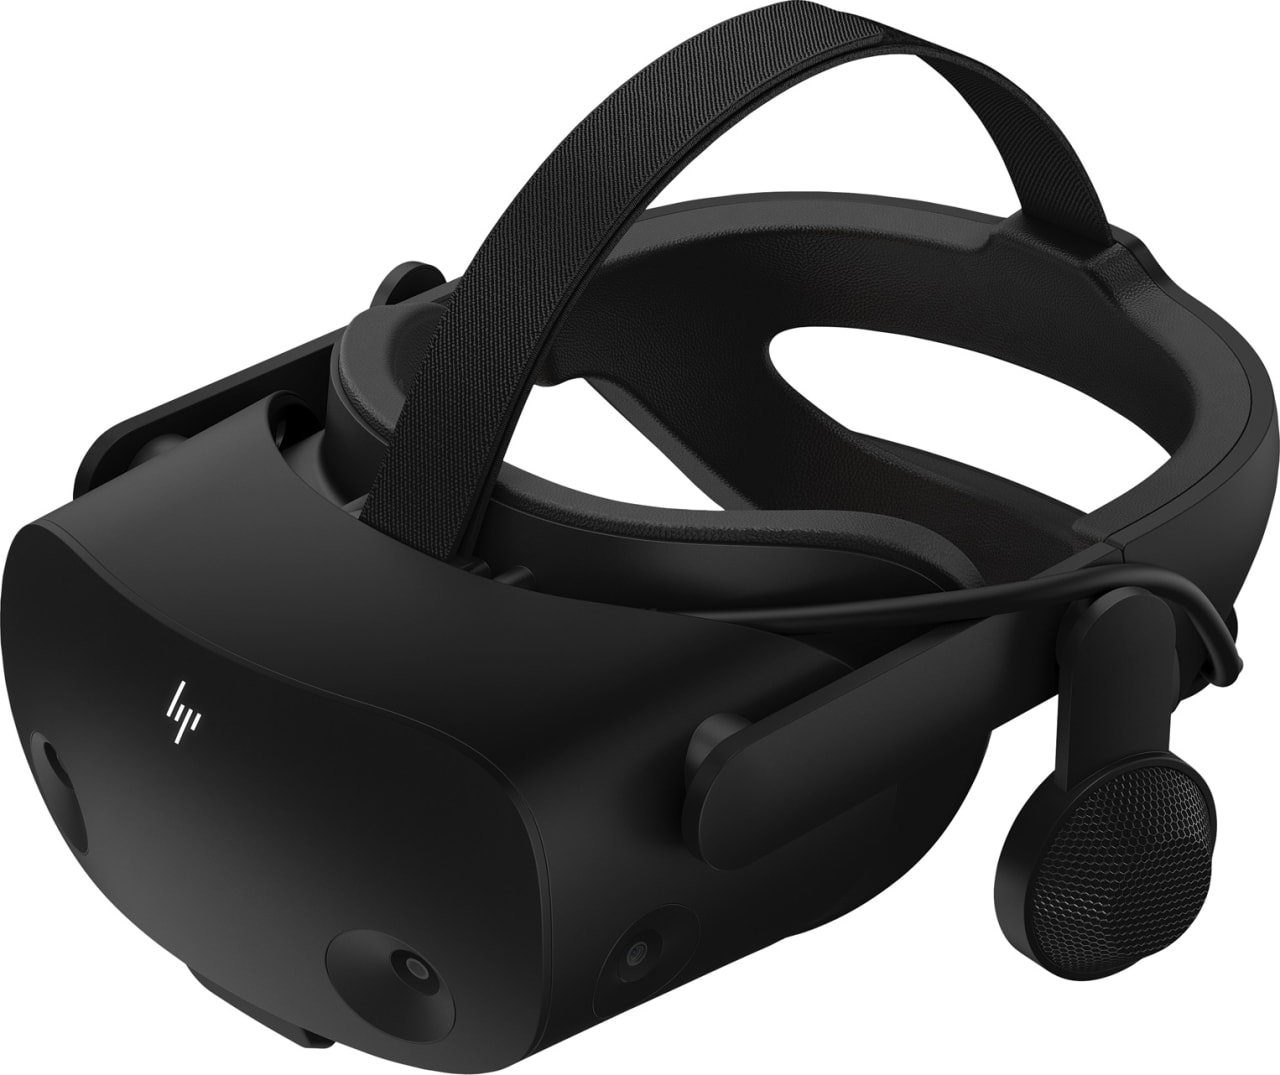 Black HP Reverb G2 Omnicept Edition (inluding 2 motion controllers) Virtual Reality Headset.4